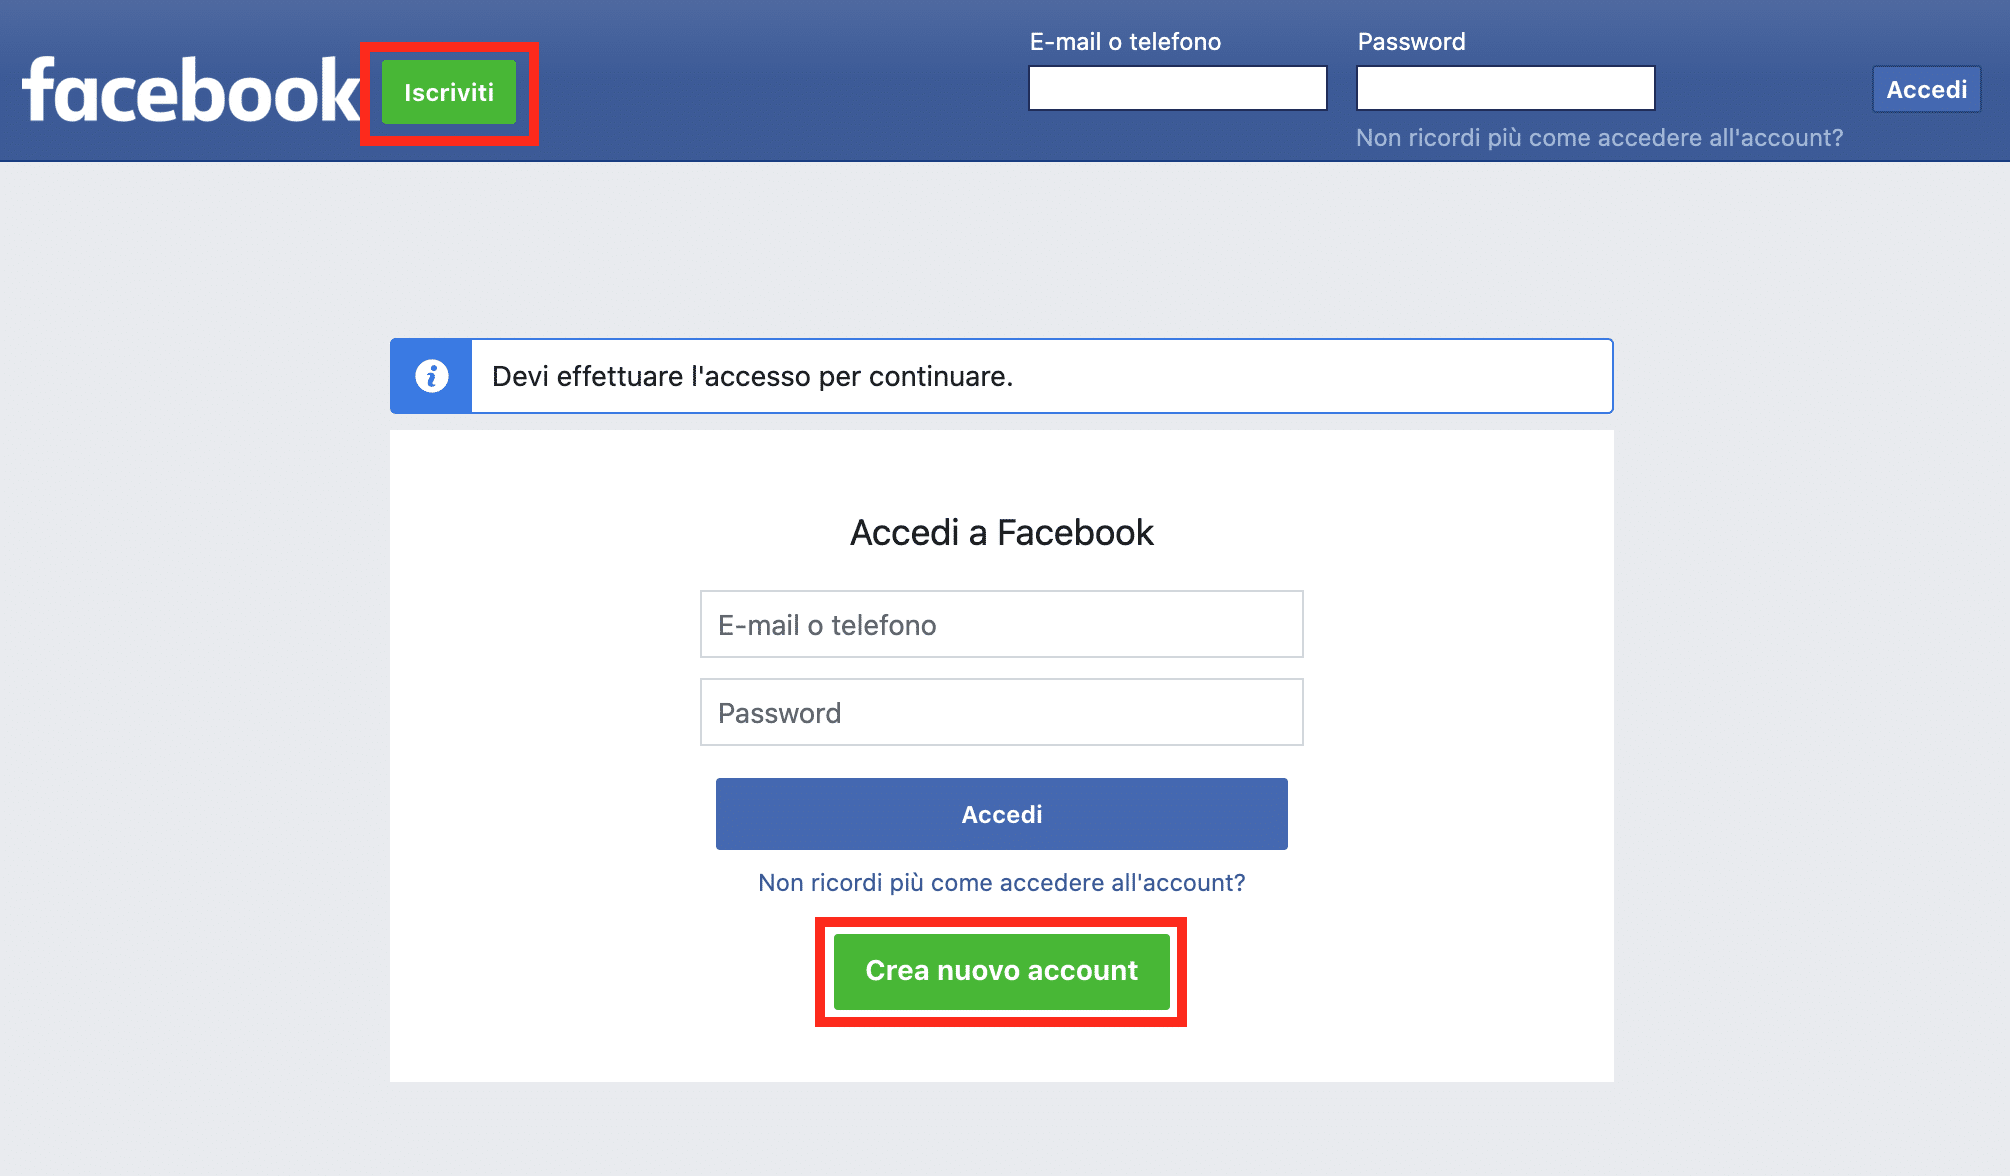 Register with Facebook to be able to use the marketplace and sell items